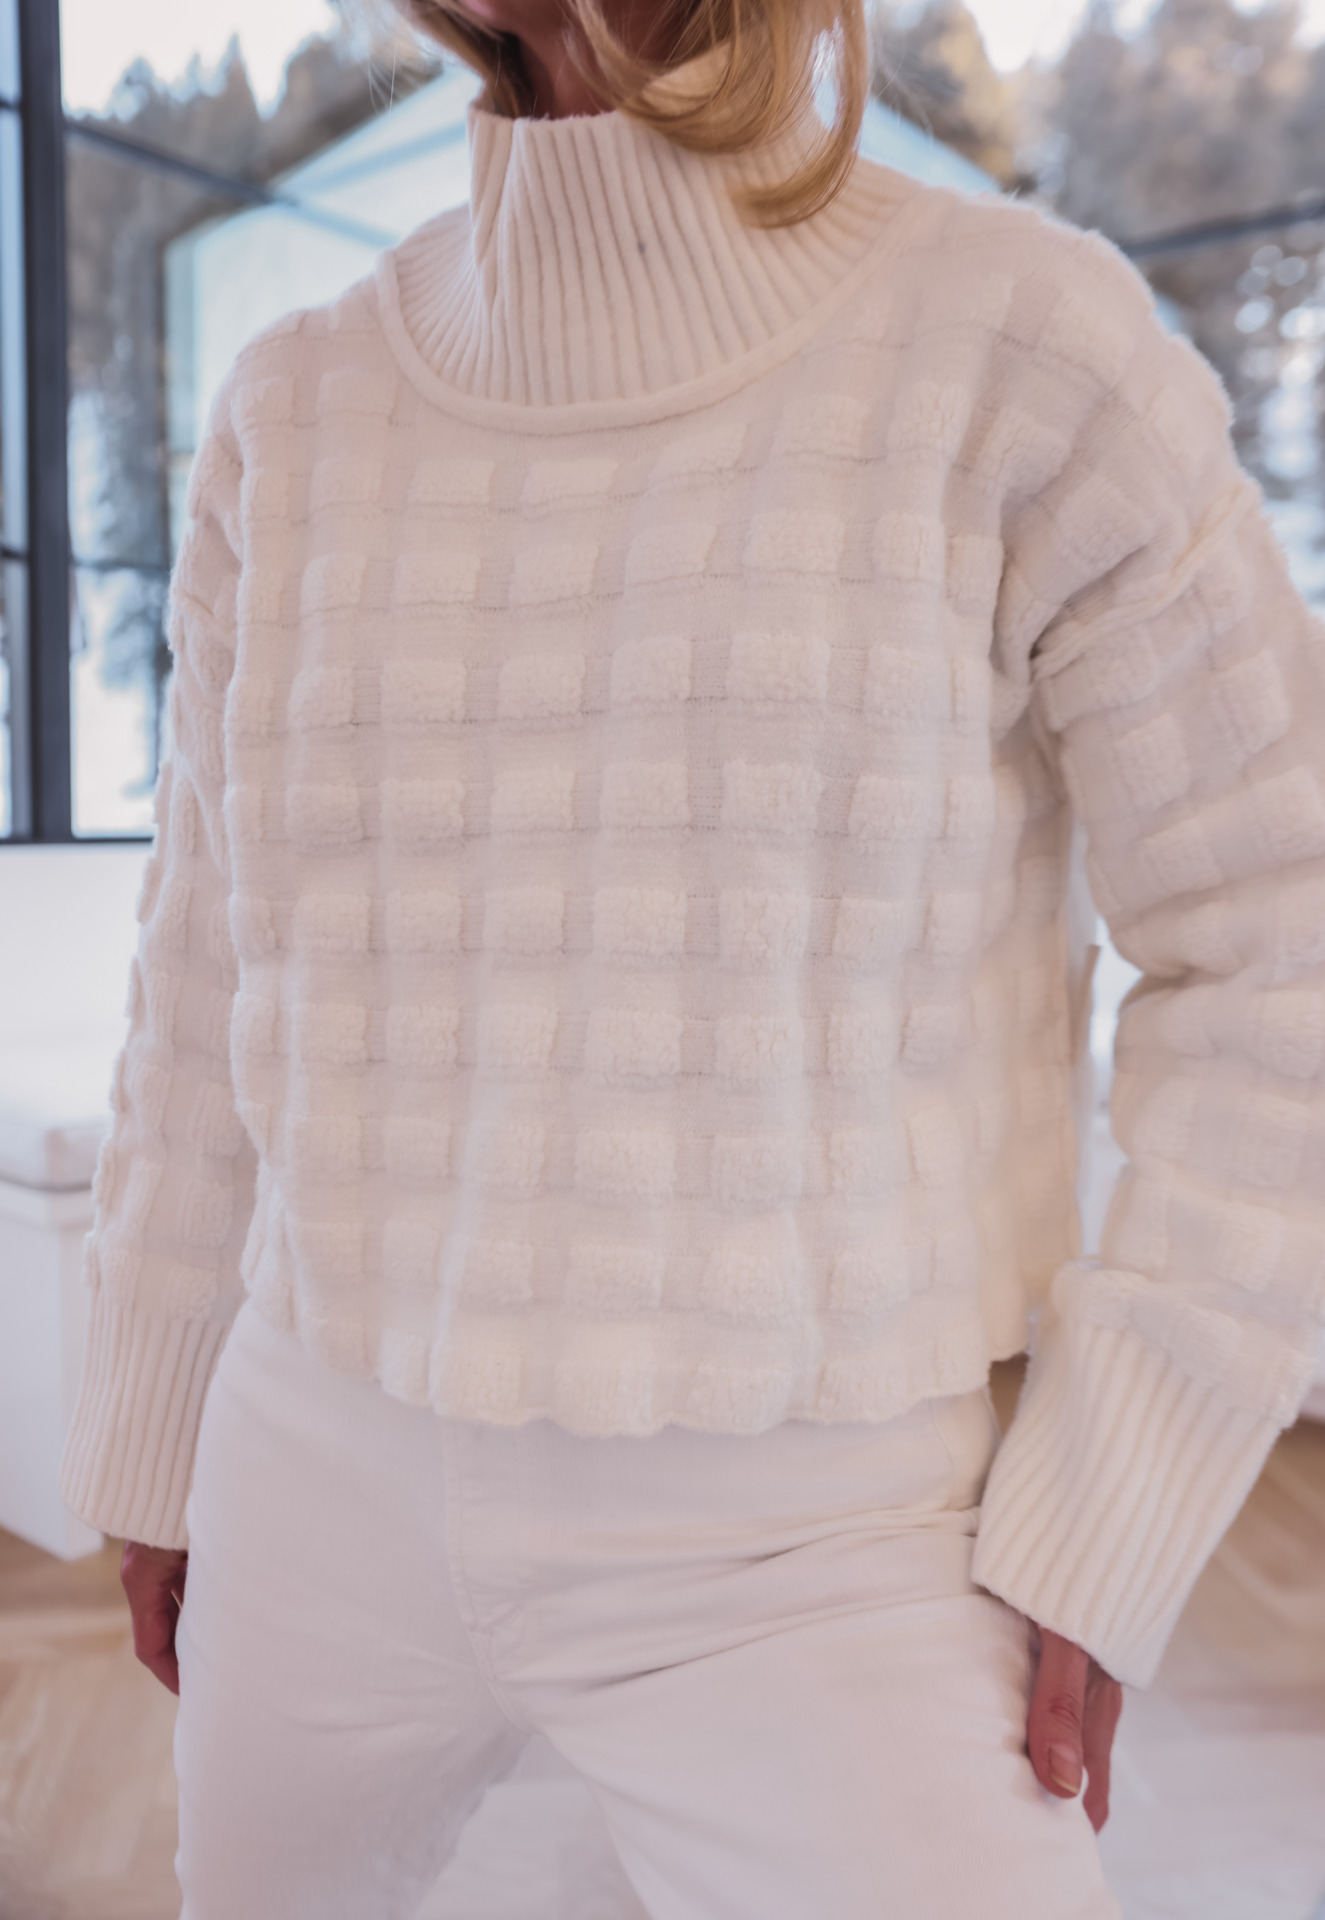 Light Neutral Affordable Sweaters for Winter